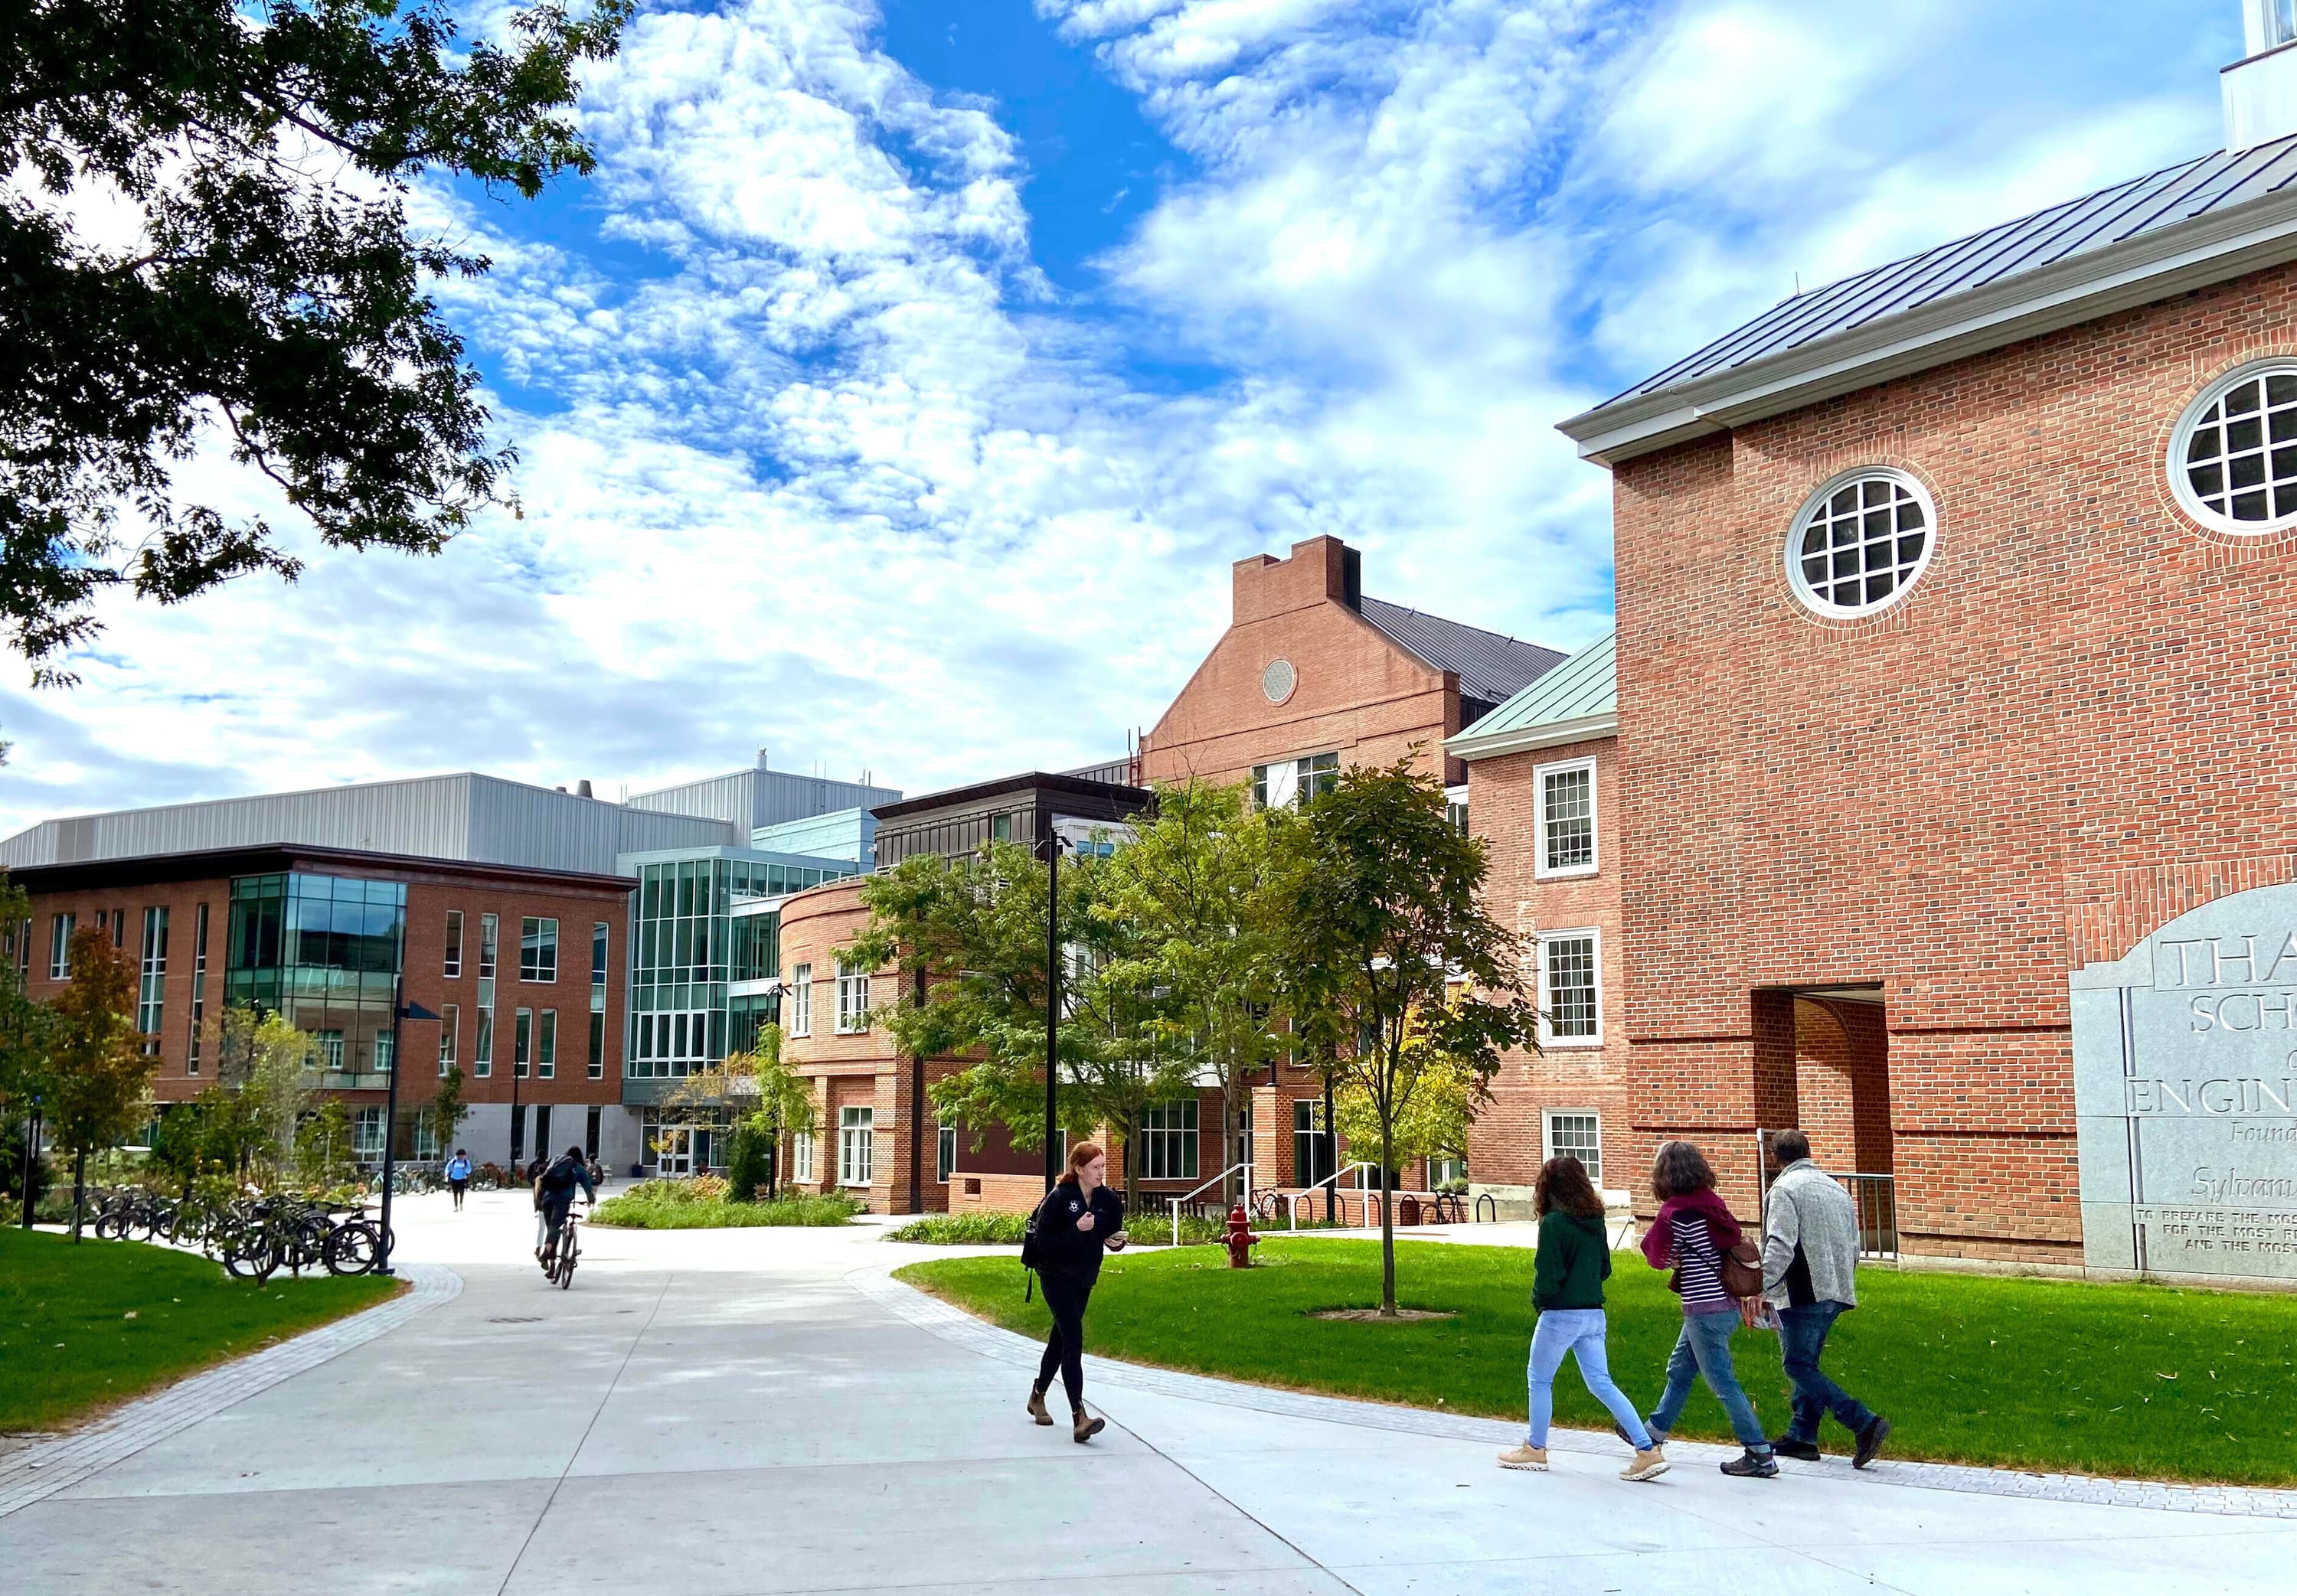 Under a blue sky, students walk along a pathway next to brick buildings on the West End of Dartmouth's campus.